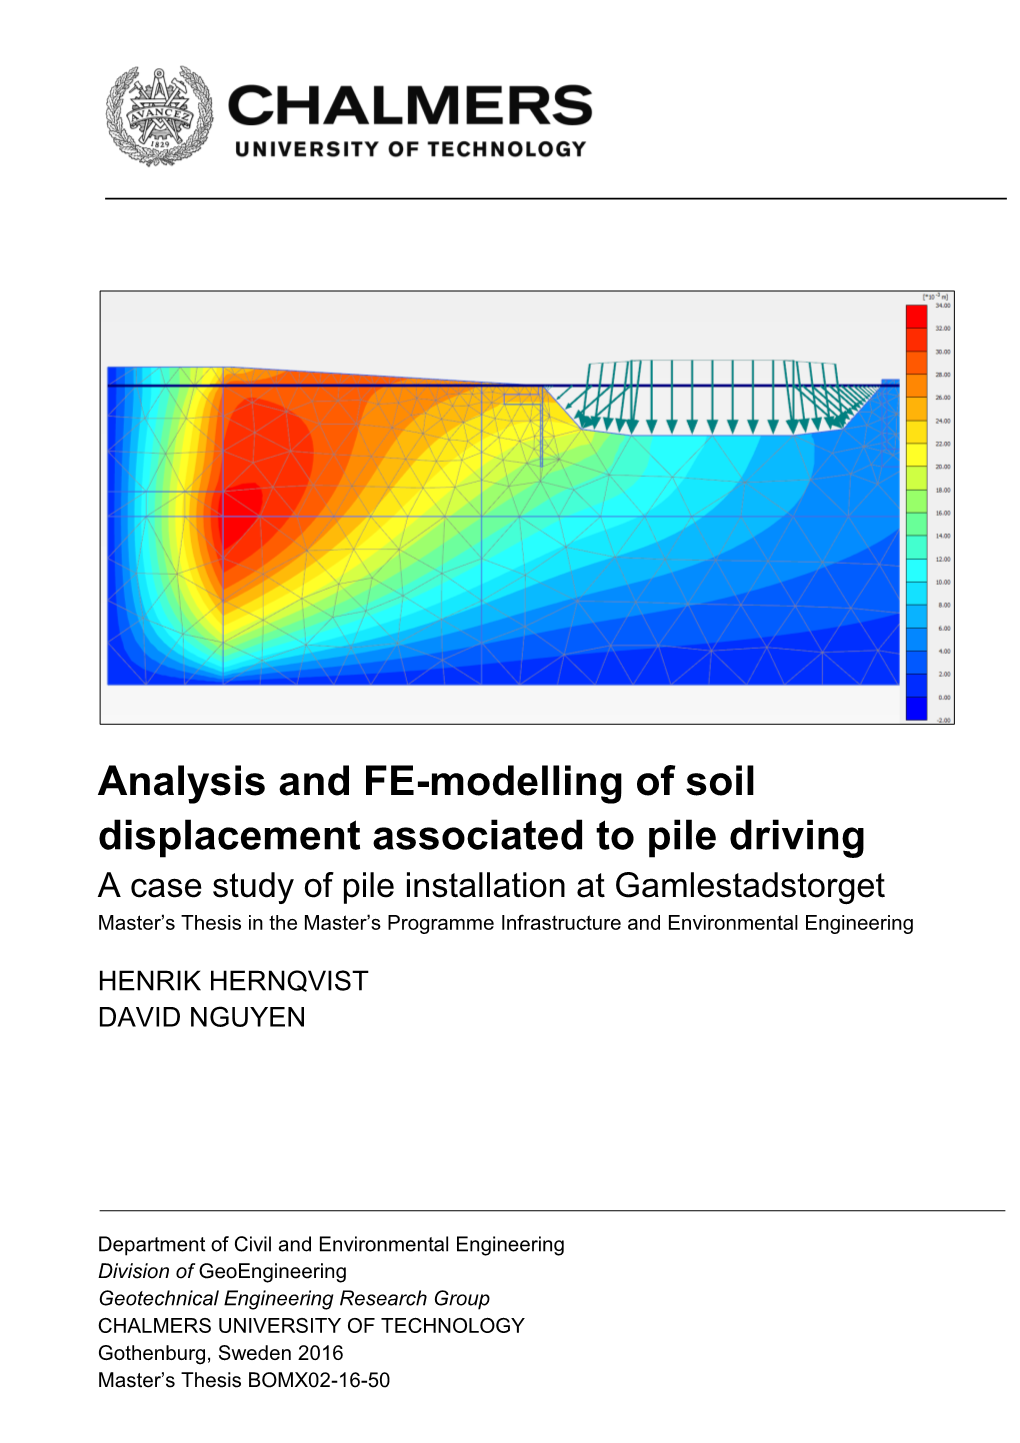 Analysis and FE-Modelling of Soil Displacement Associated to Pile Driving